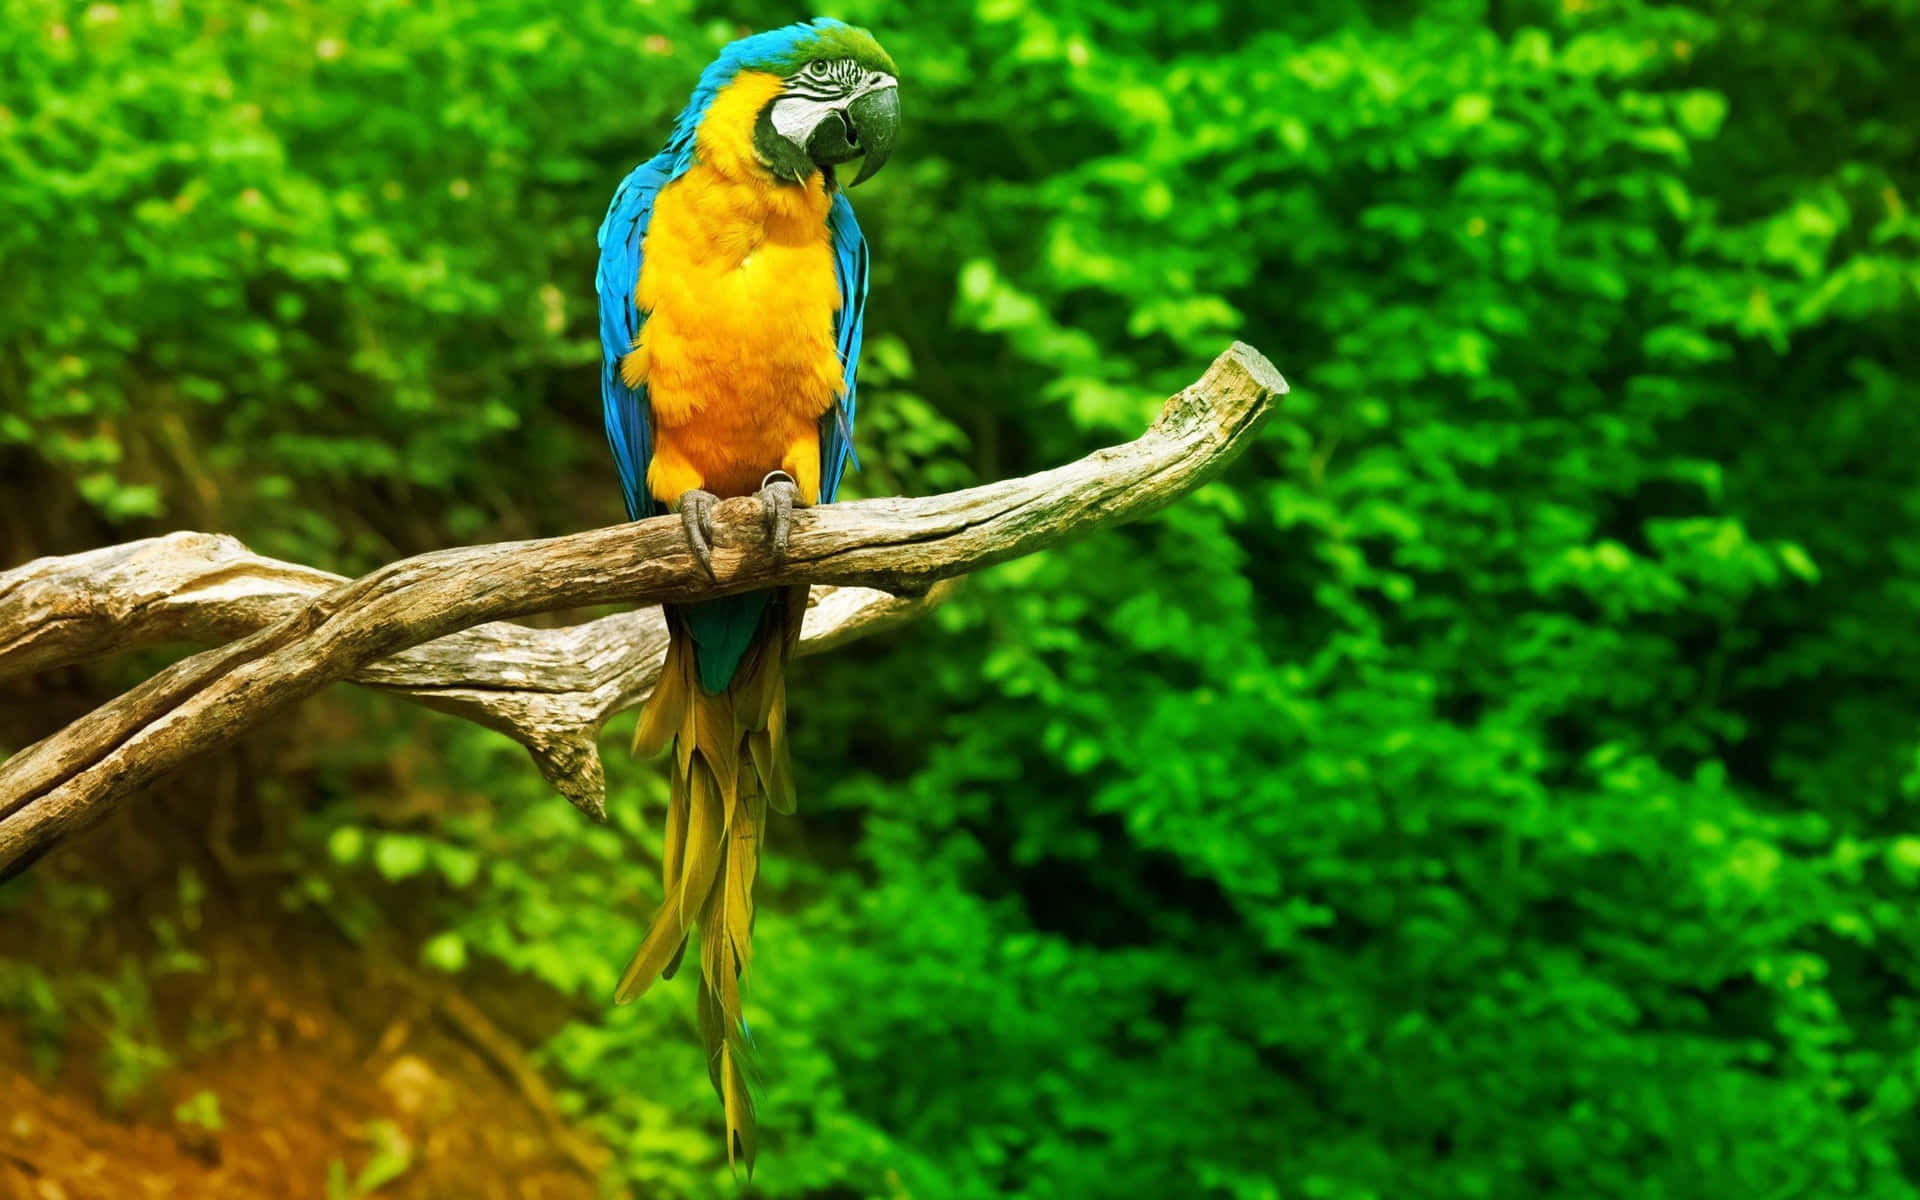 Blueand Yellow Macaw Perched Wallpaper